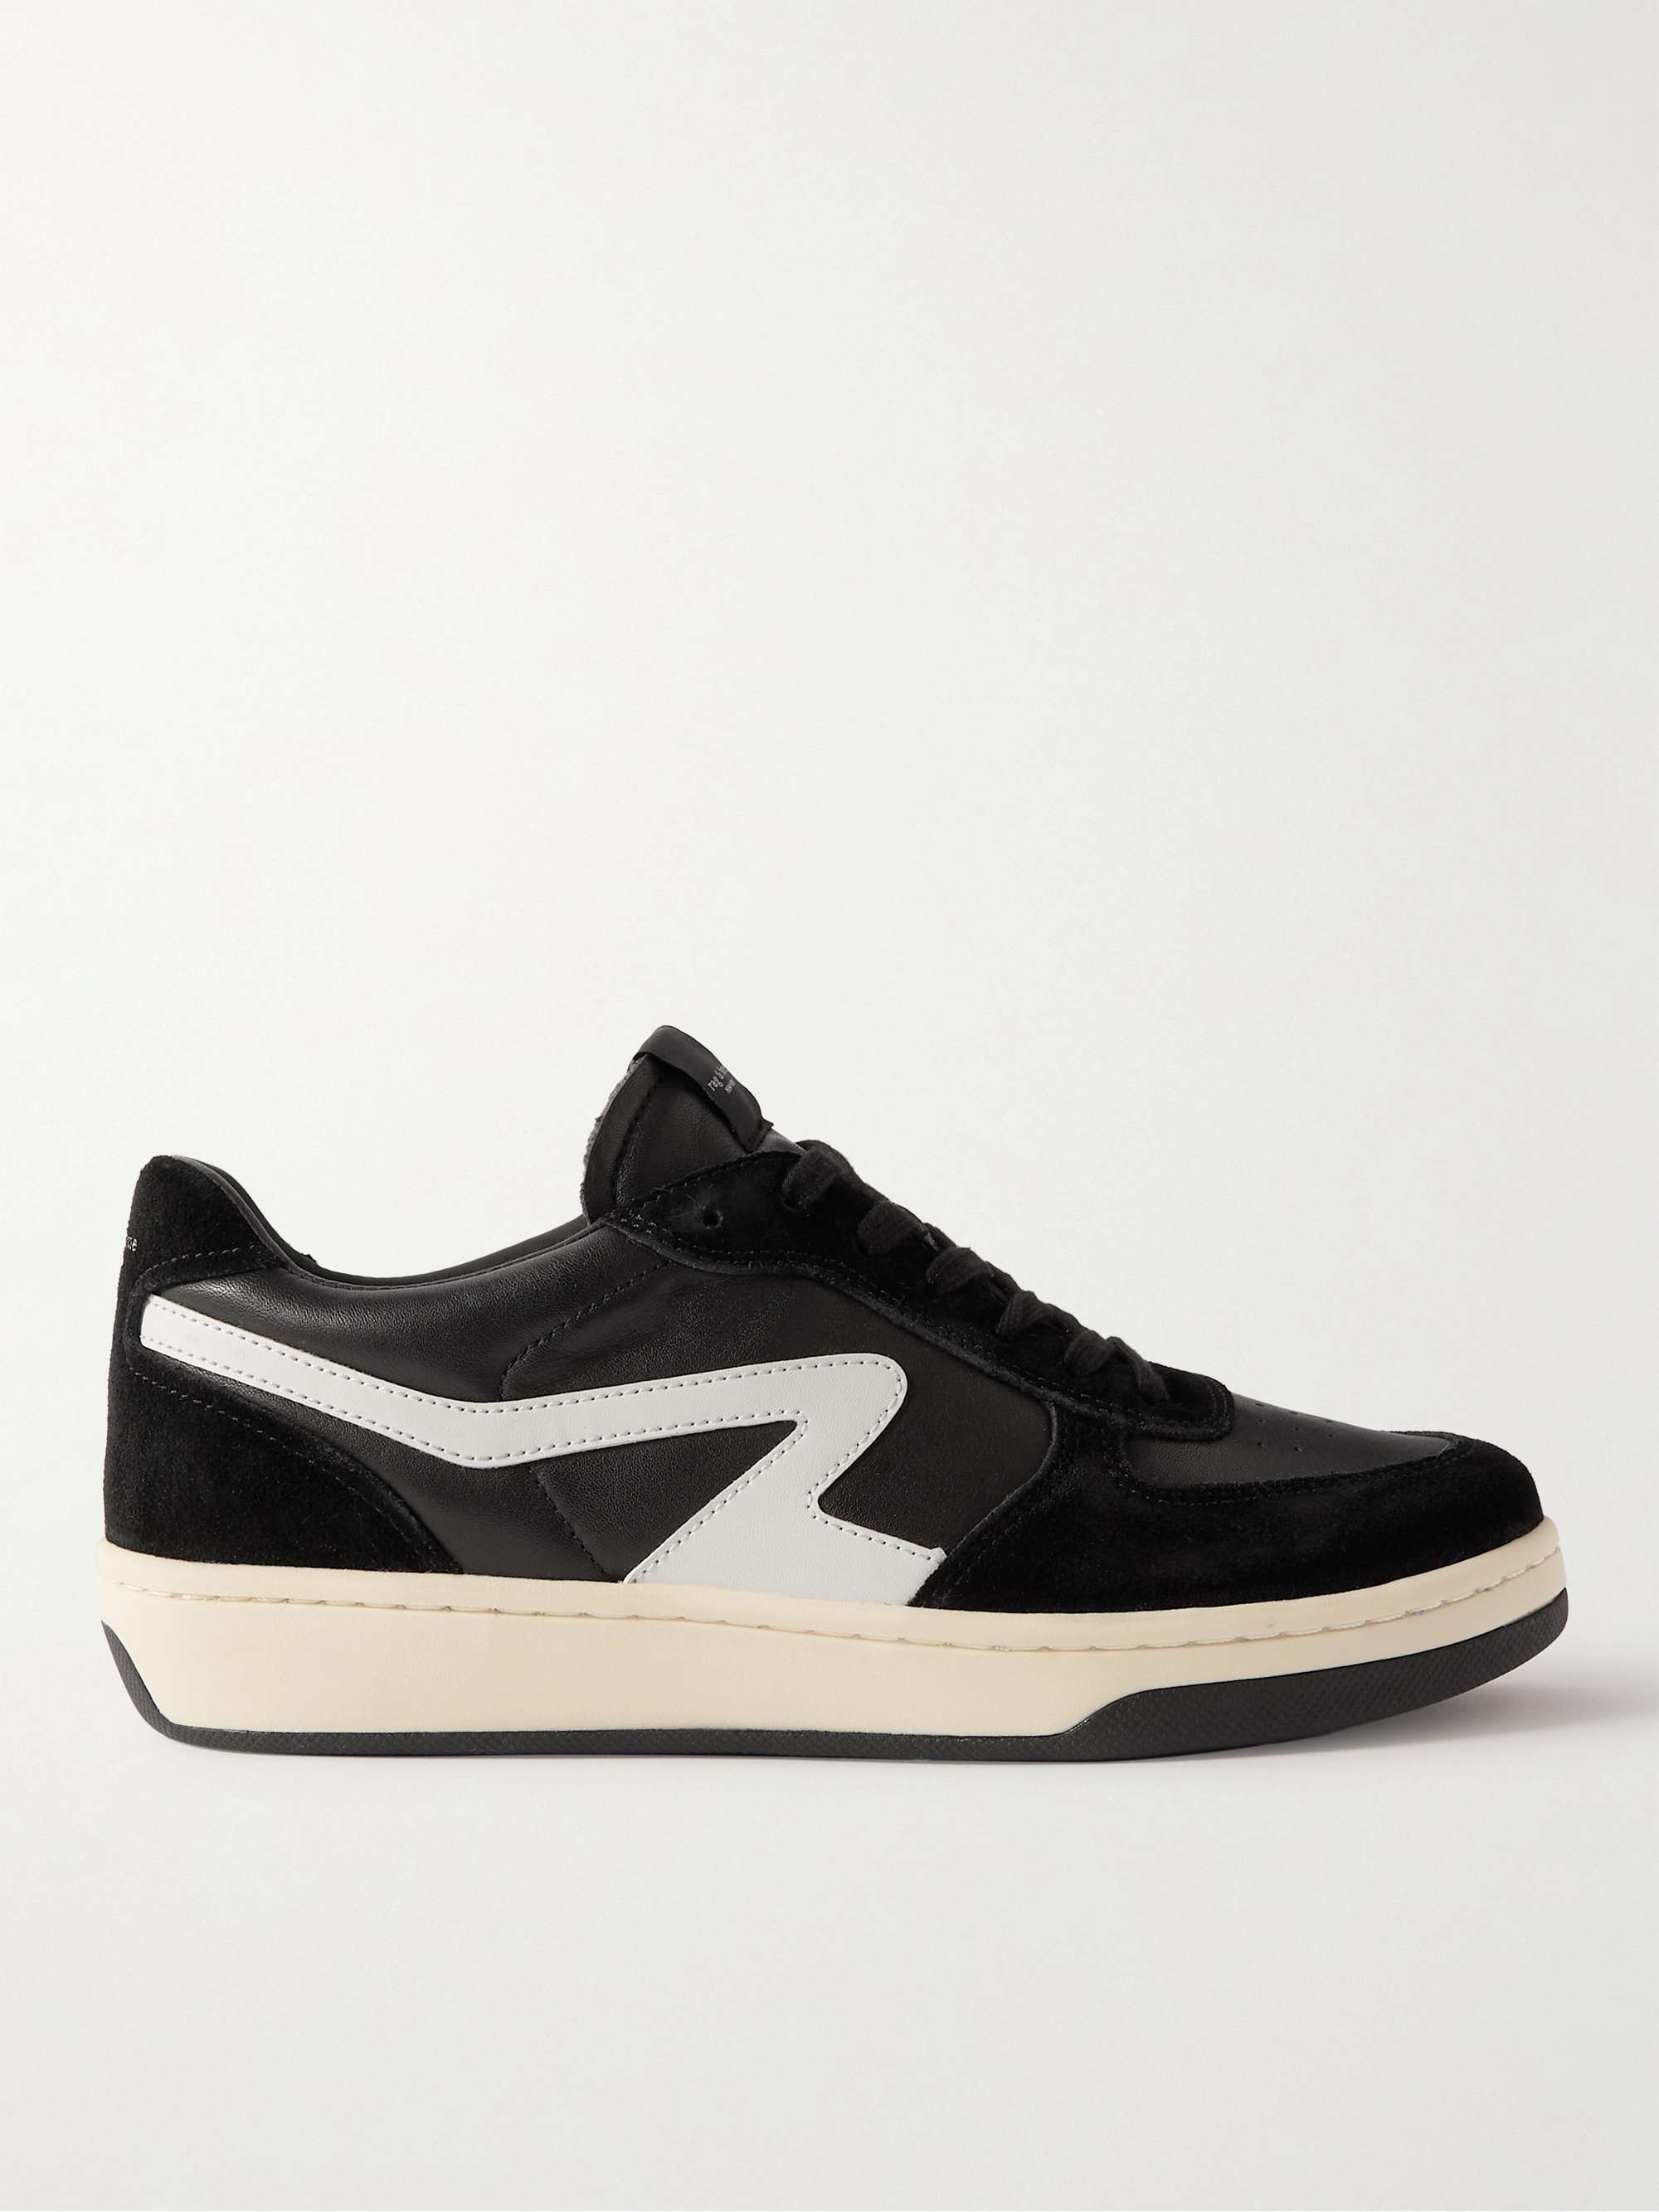 RAG & BONE Retro Court Suede-Trimmed Leather Sneakers for Men | MR PORTER